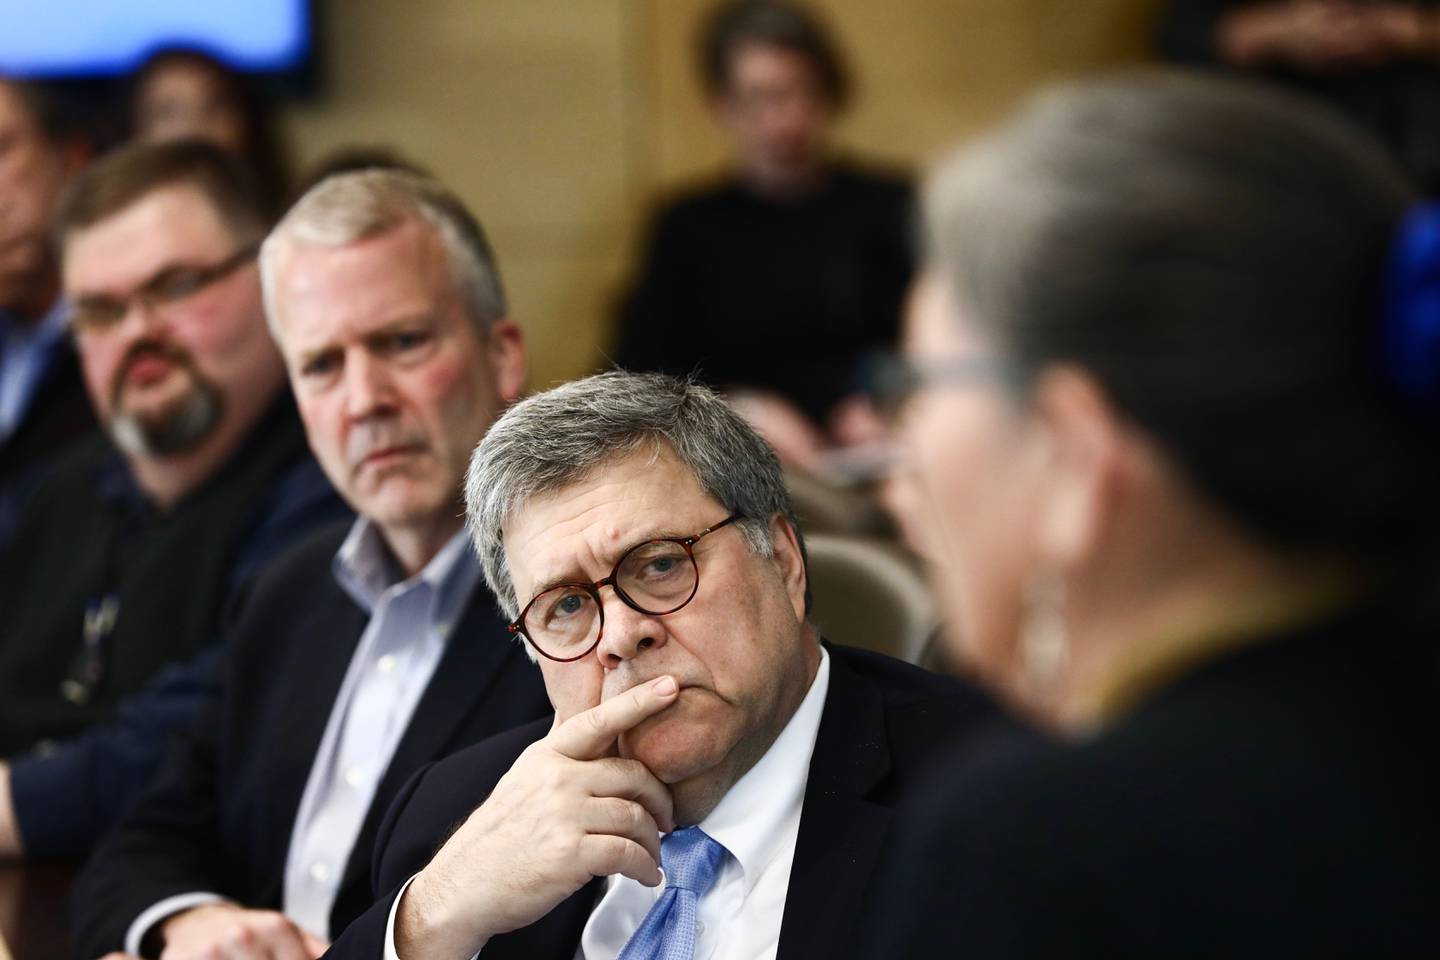 Attorney General William Barr Native justice roundtable